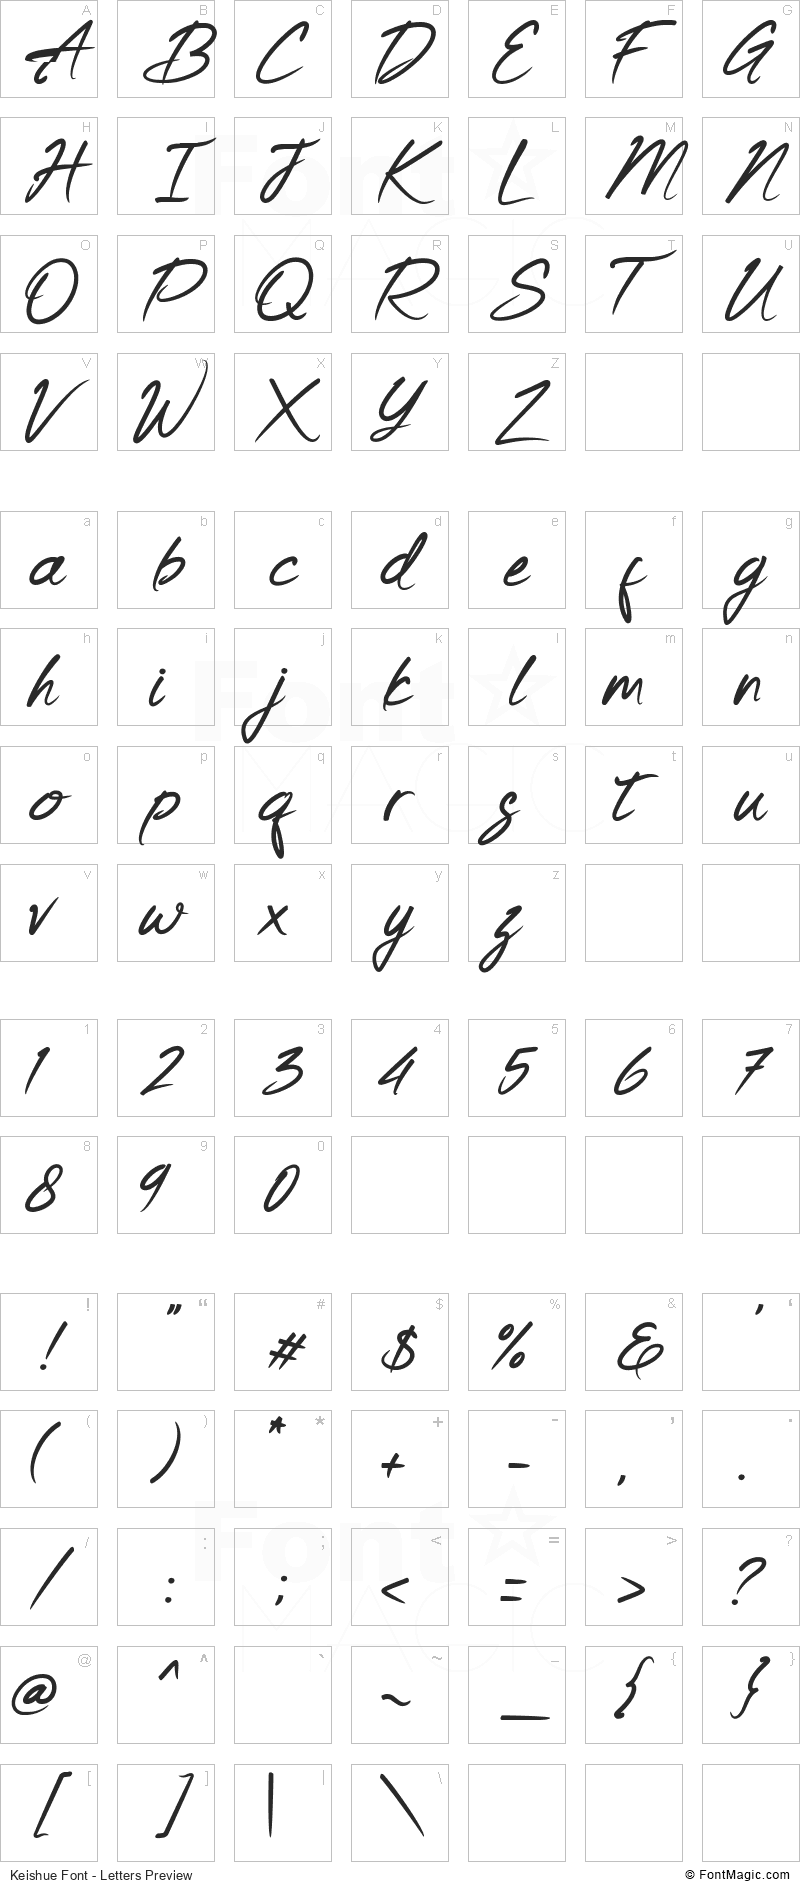 Keishue Font - All Latters Preview Chart